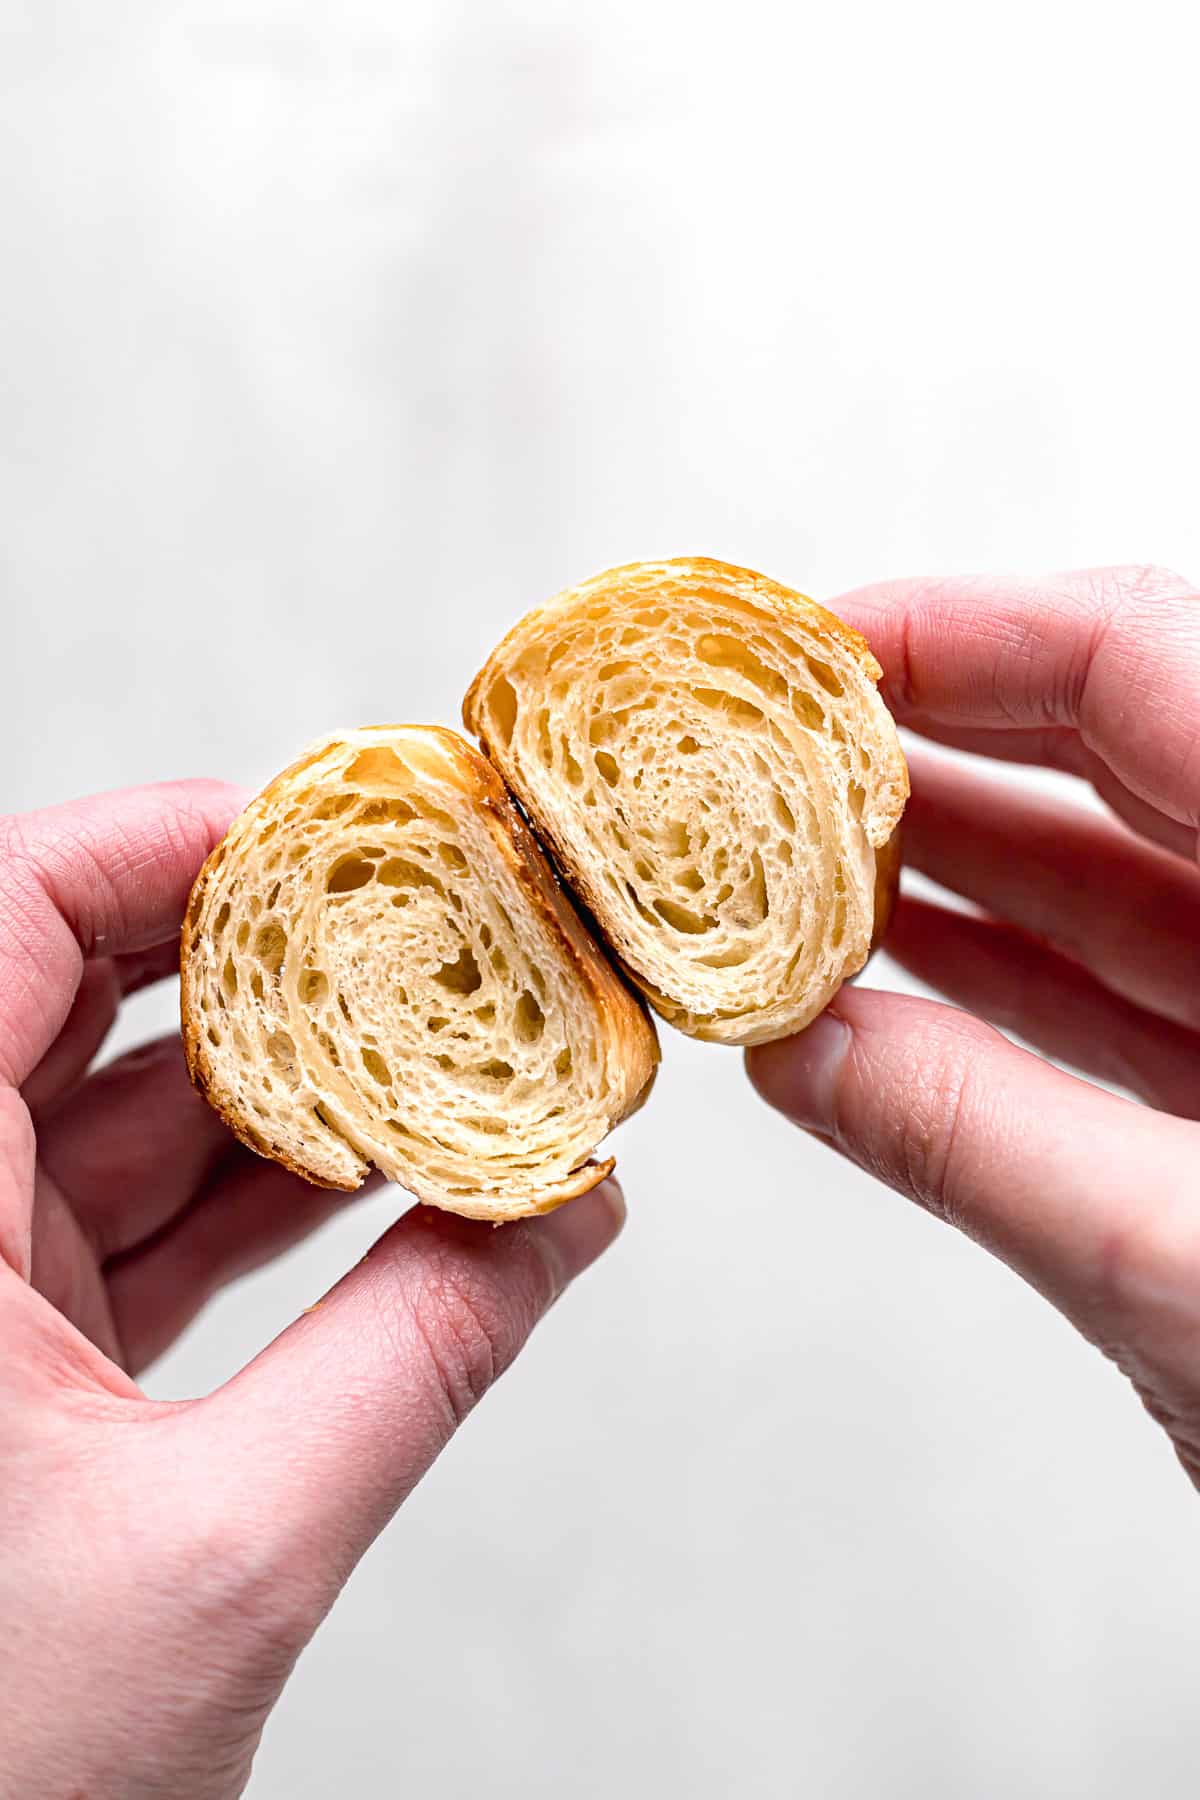 mini croissant cut in half to show inside texture held in two hands.